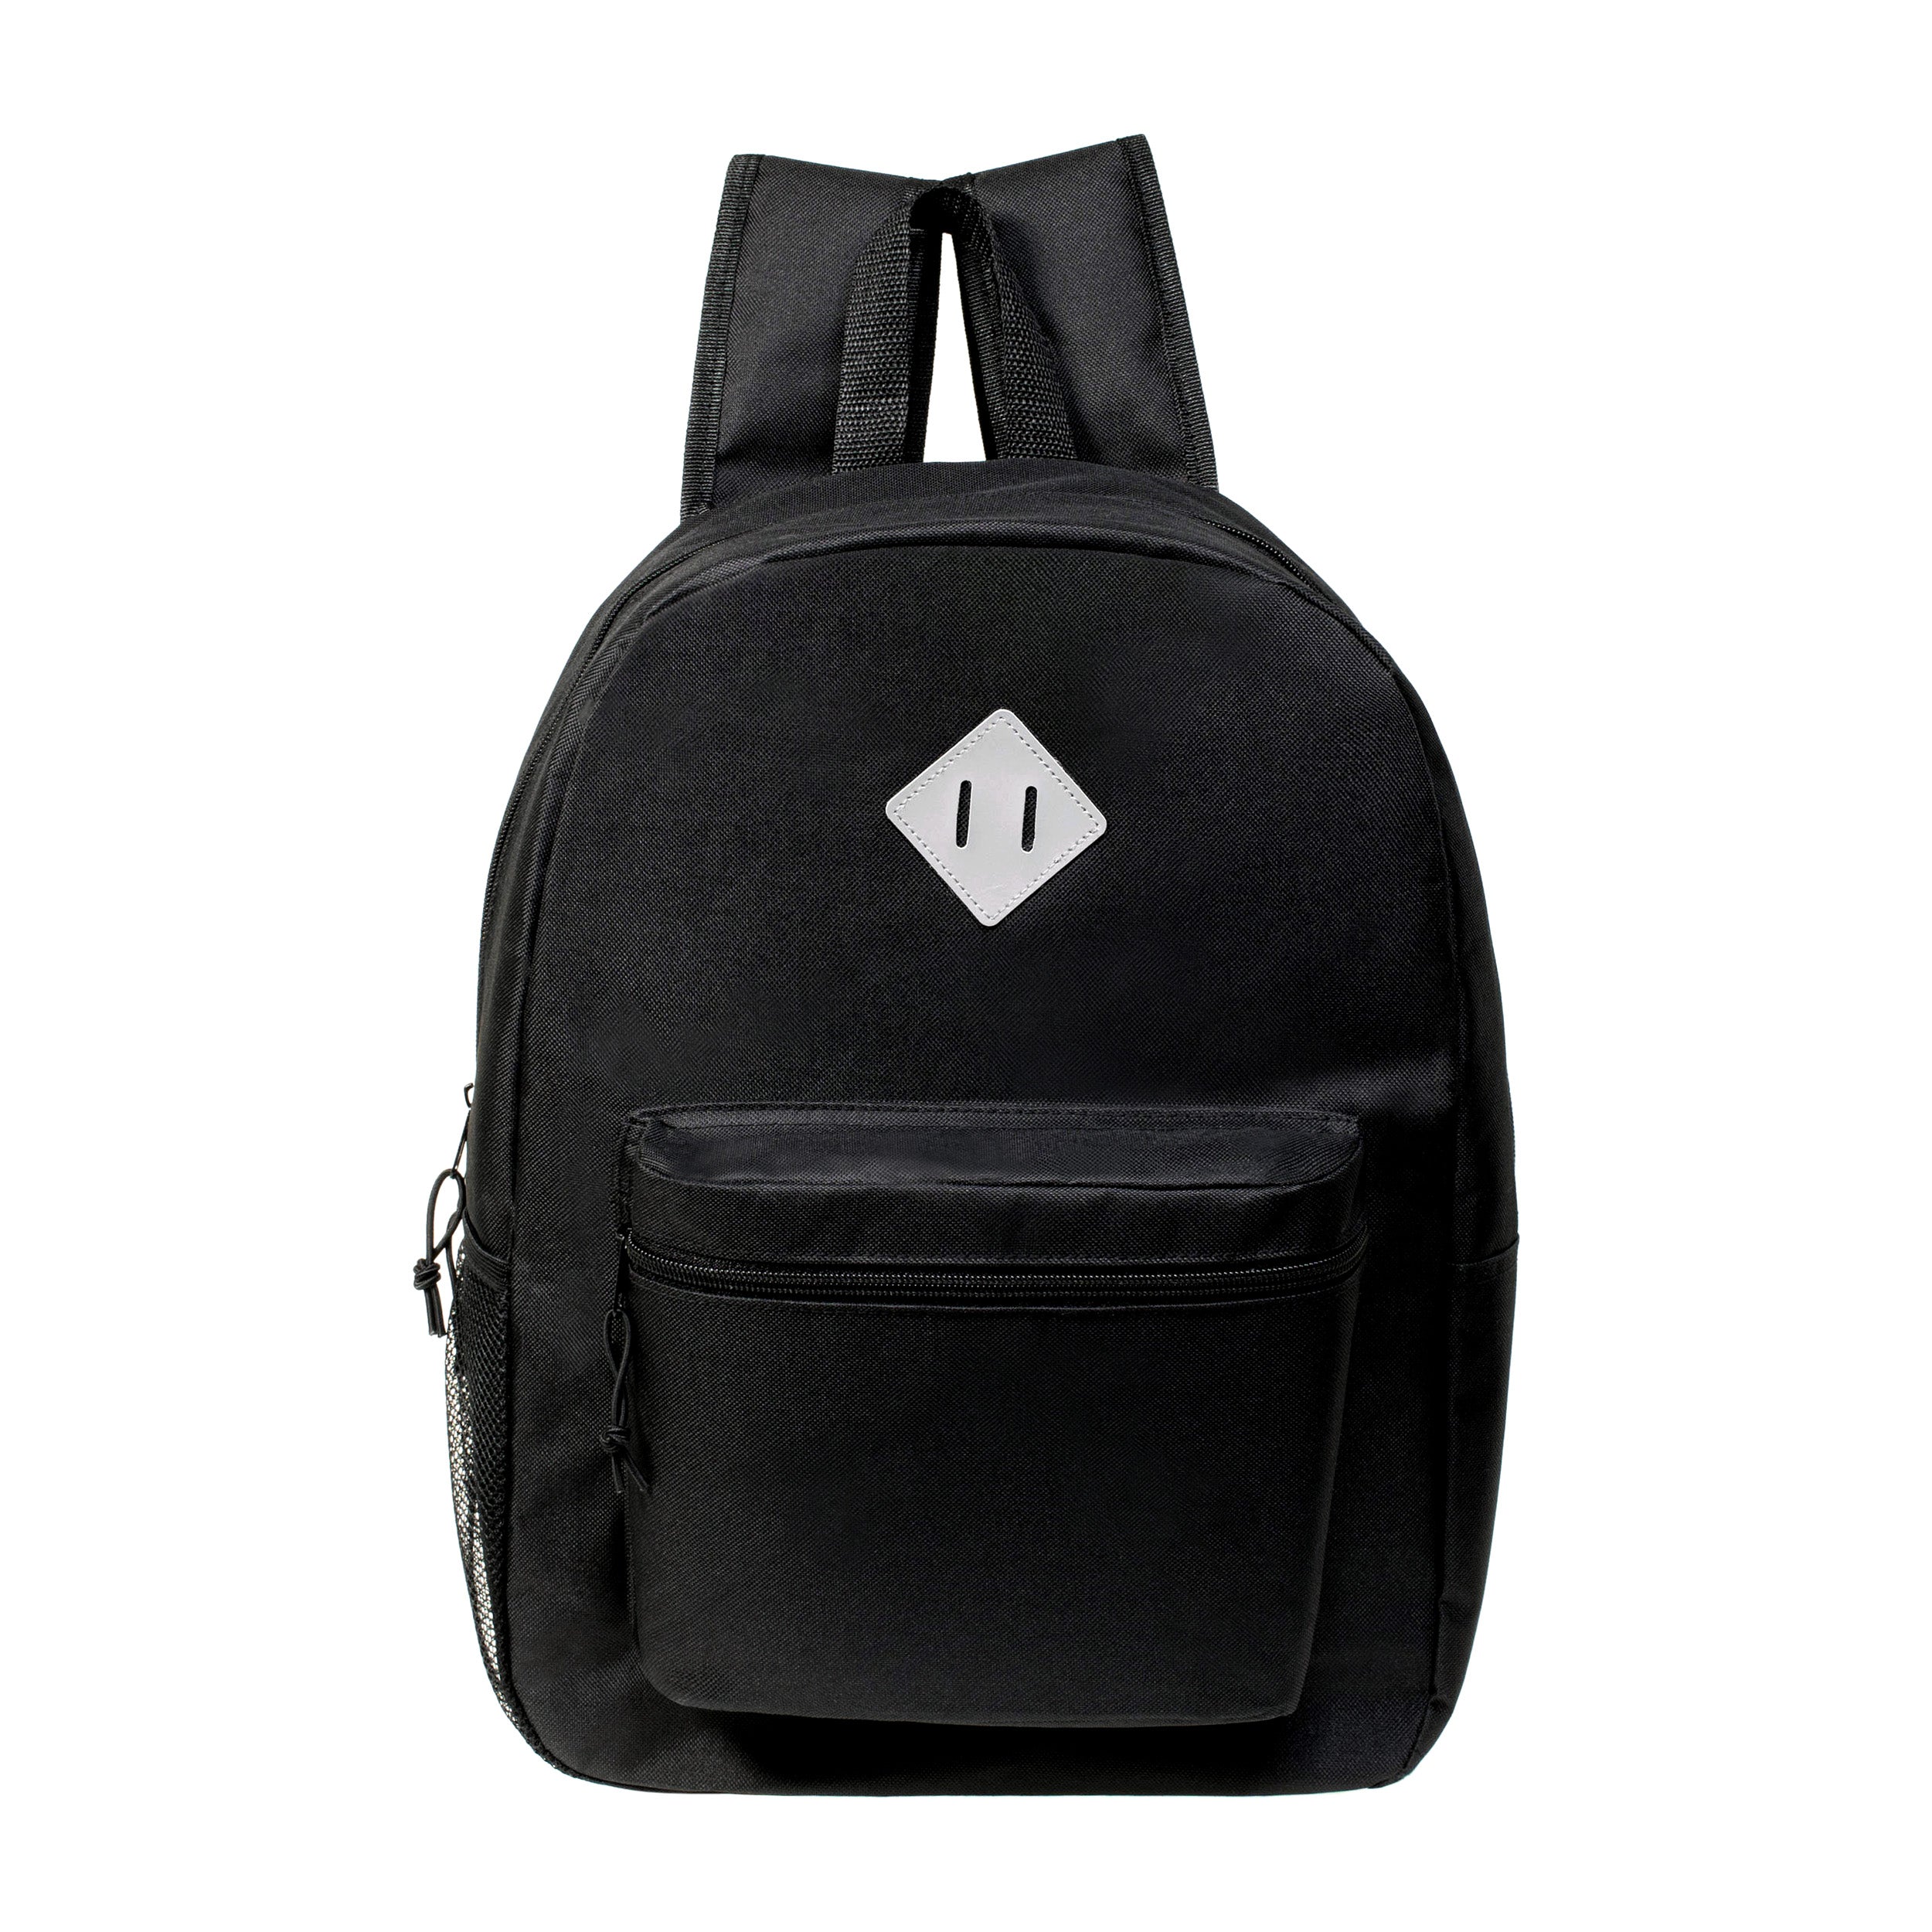 17" Deluxe Wholesale Backpack in Black Colors - Bulk Case of 24